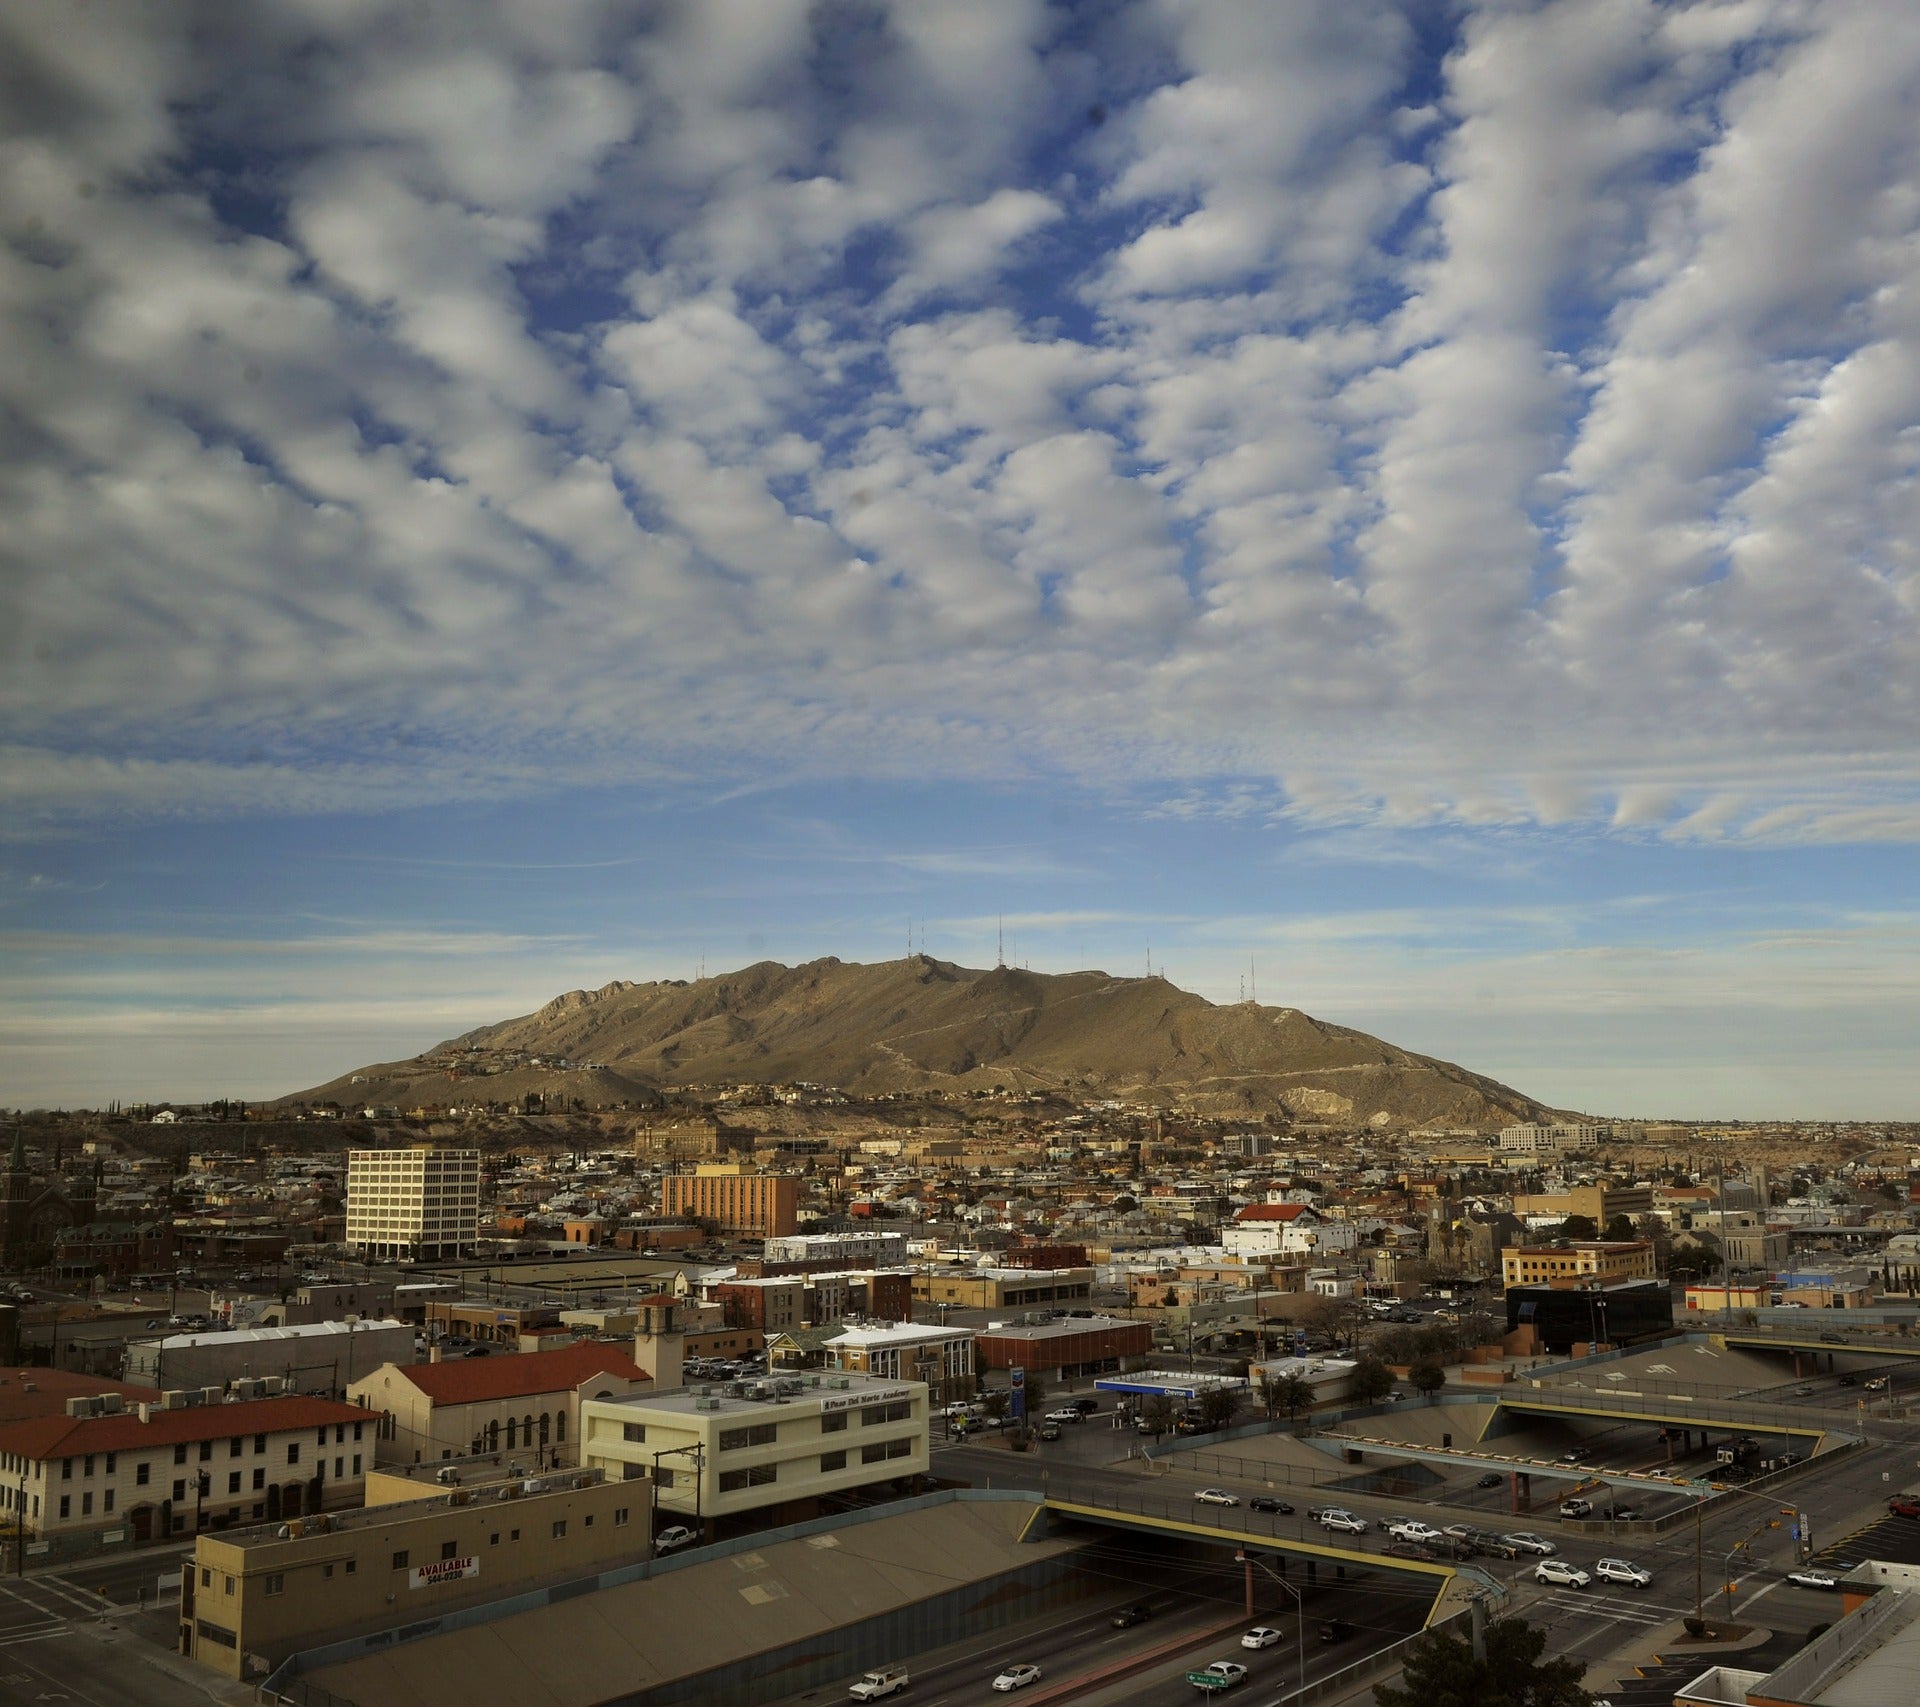 El Paso Electric should protect the city’s water and let solar power shine